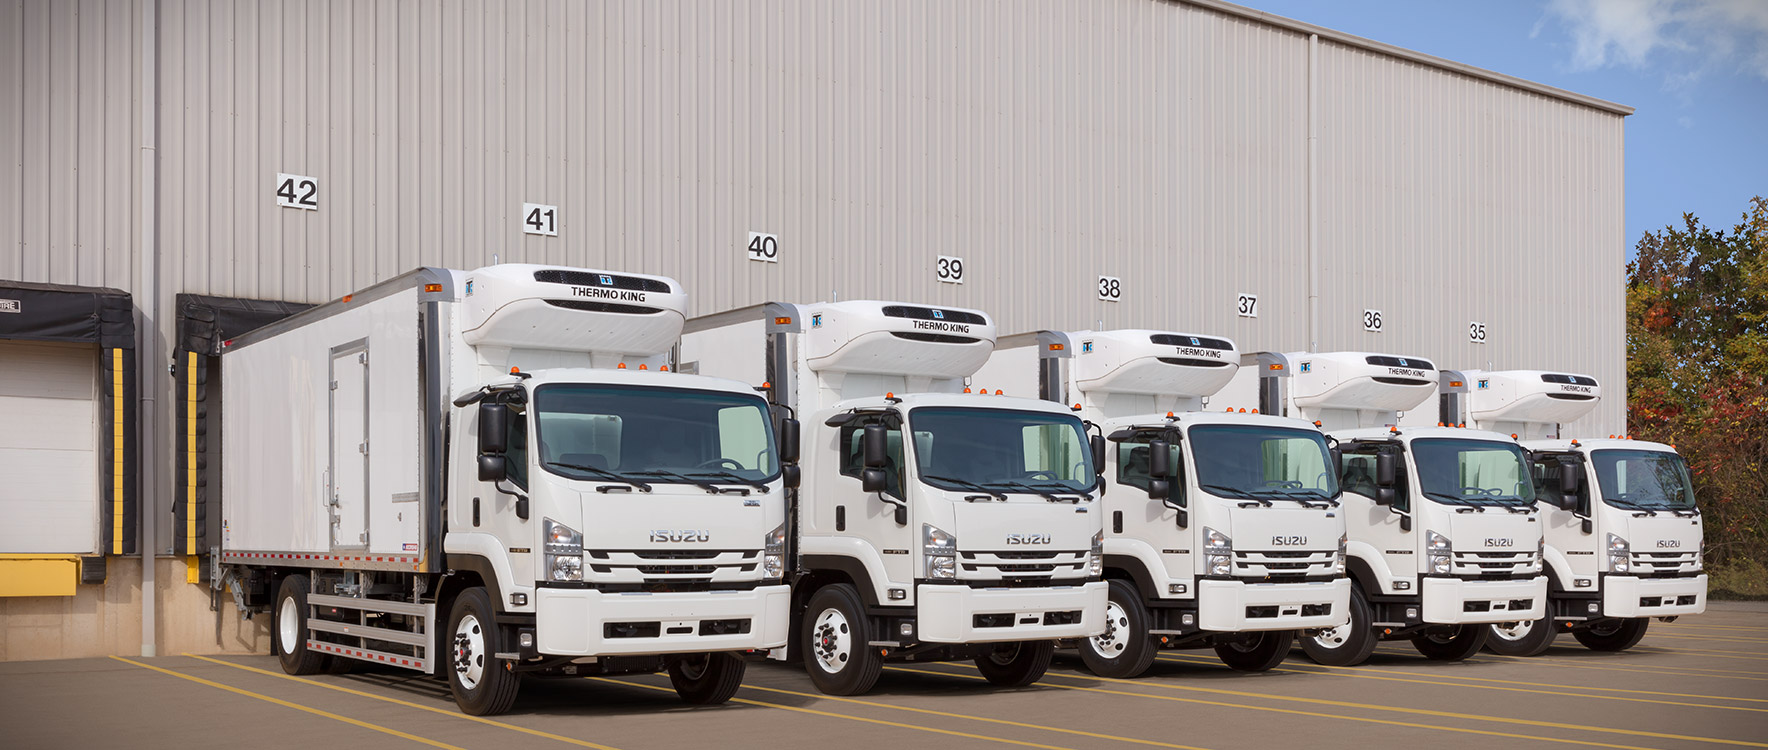 A fleet of Refrigerated Cold Star truck bodies at a loading dock